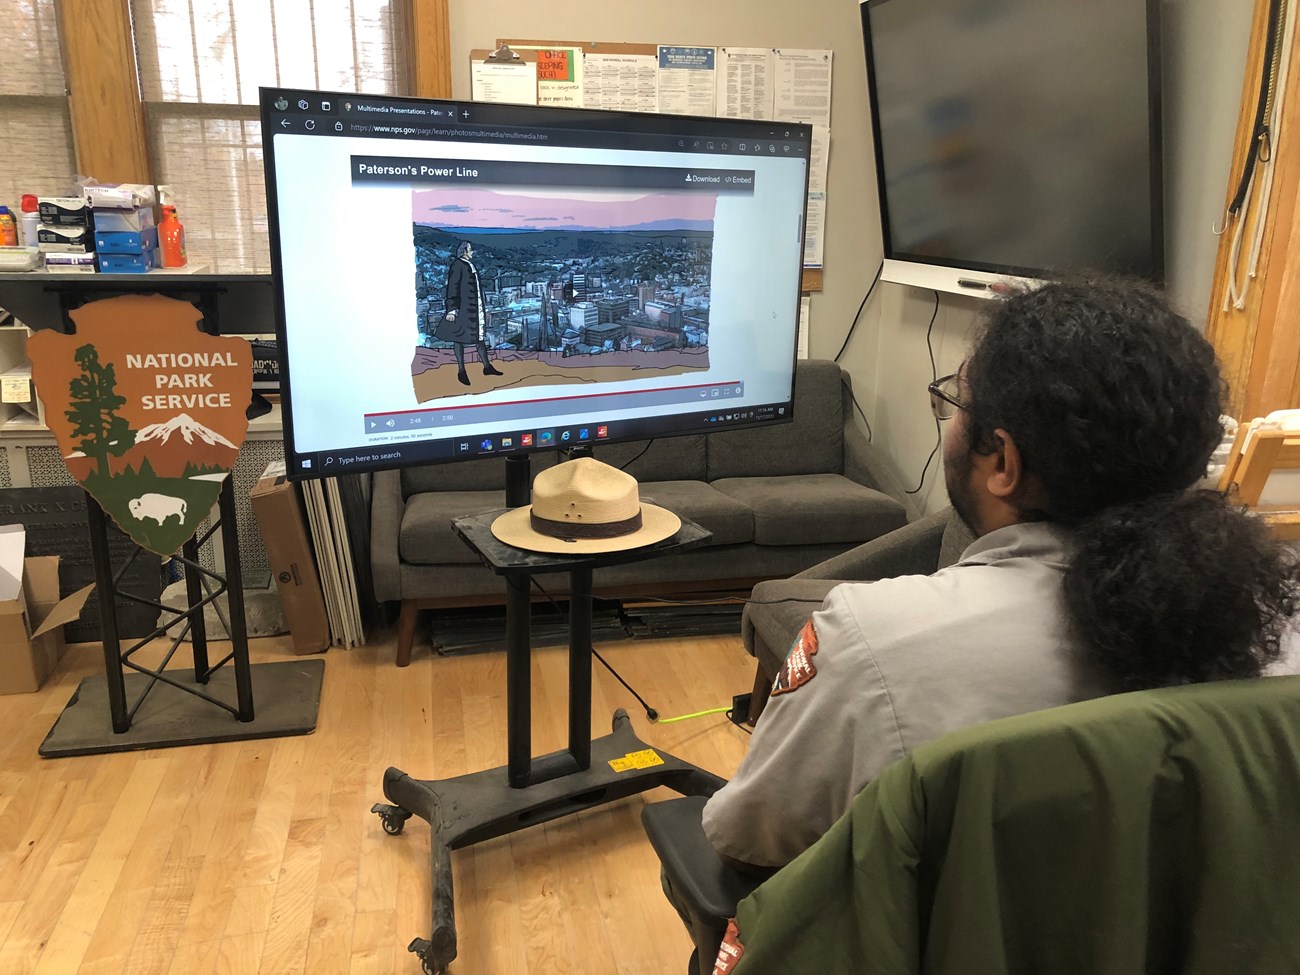 A park ranger watches a video on "Paterson's Power Lines" on a television in an office